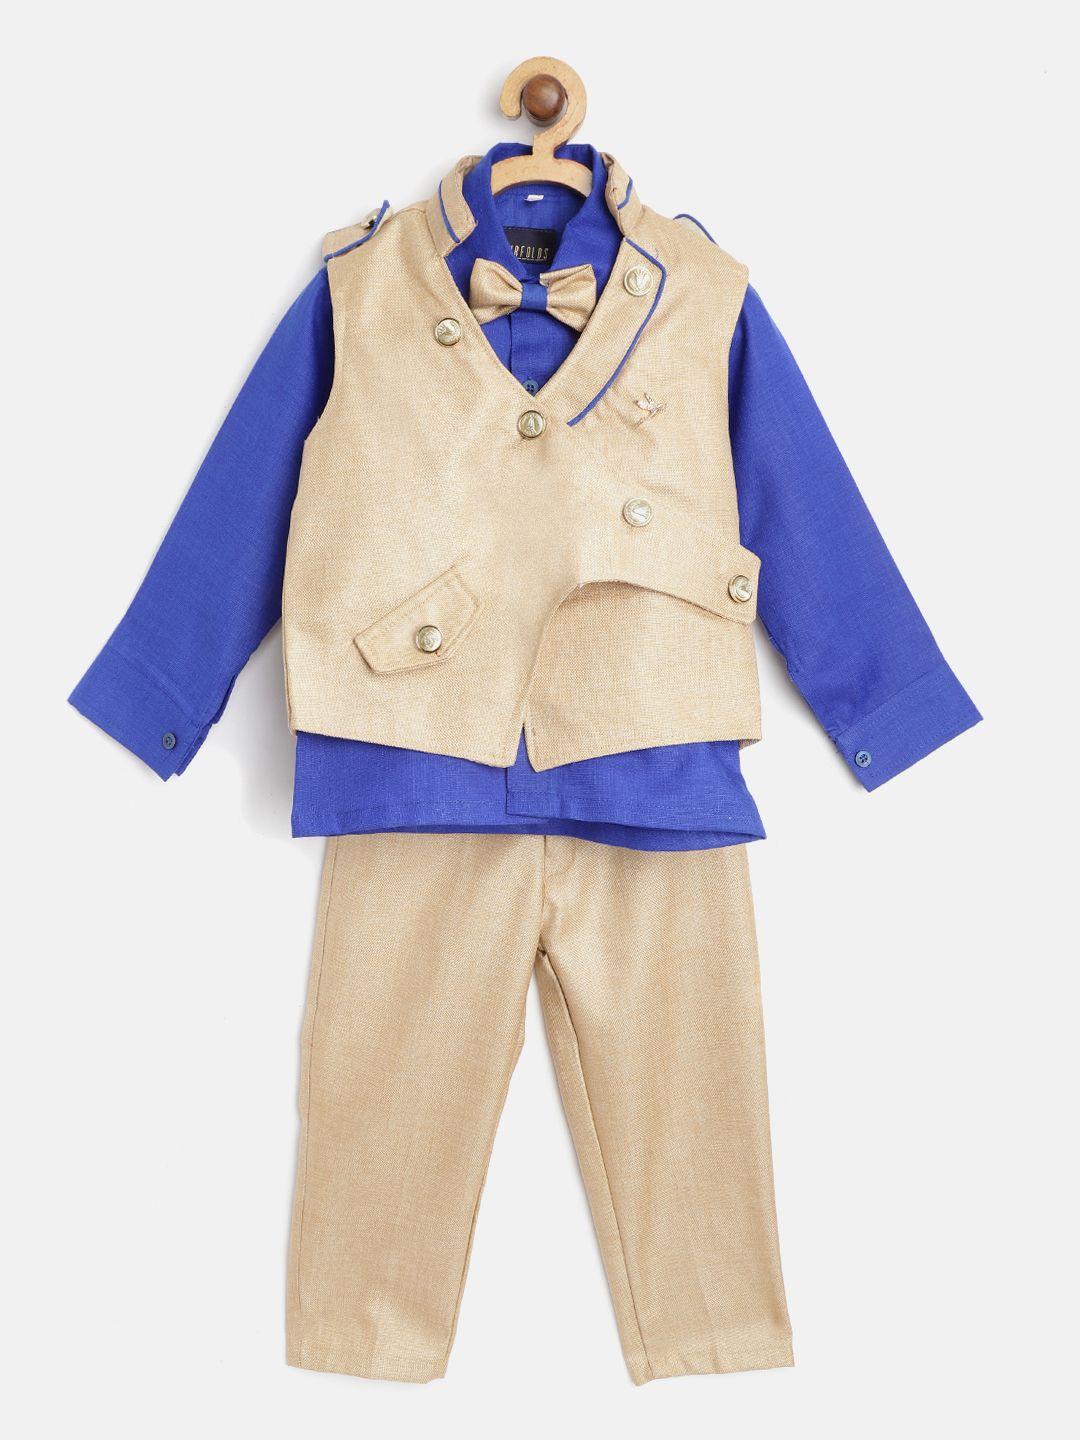 FOURFOLDS Boys Blue & Beige Solid Clothing Set with Bow Tie